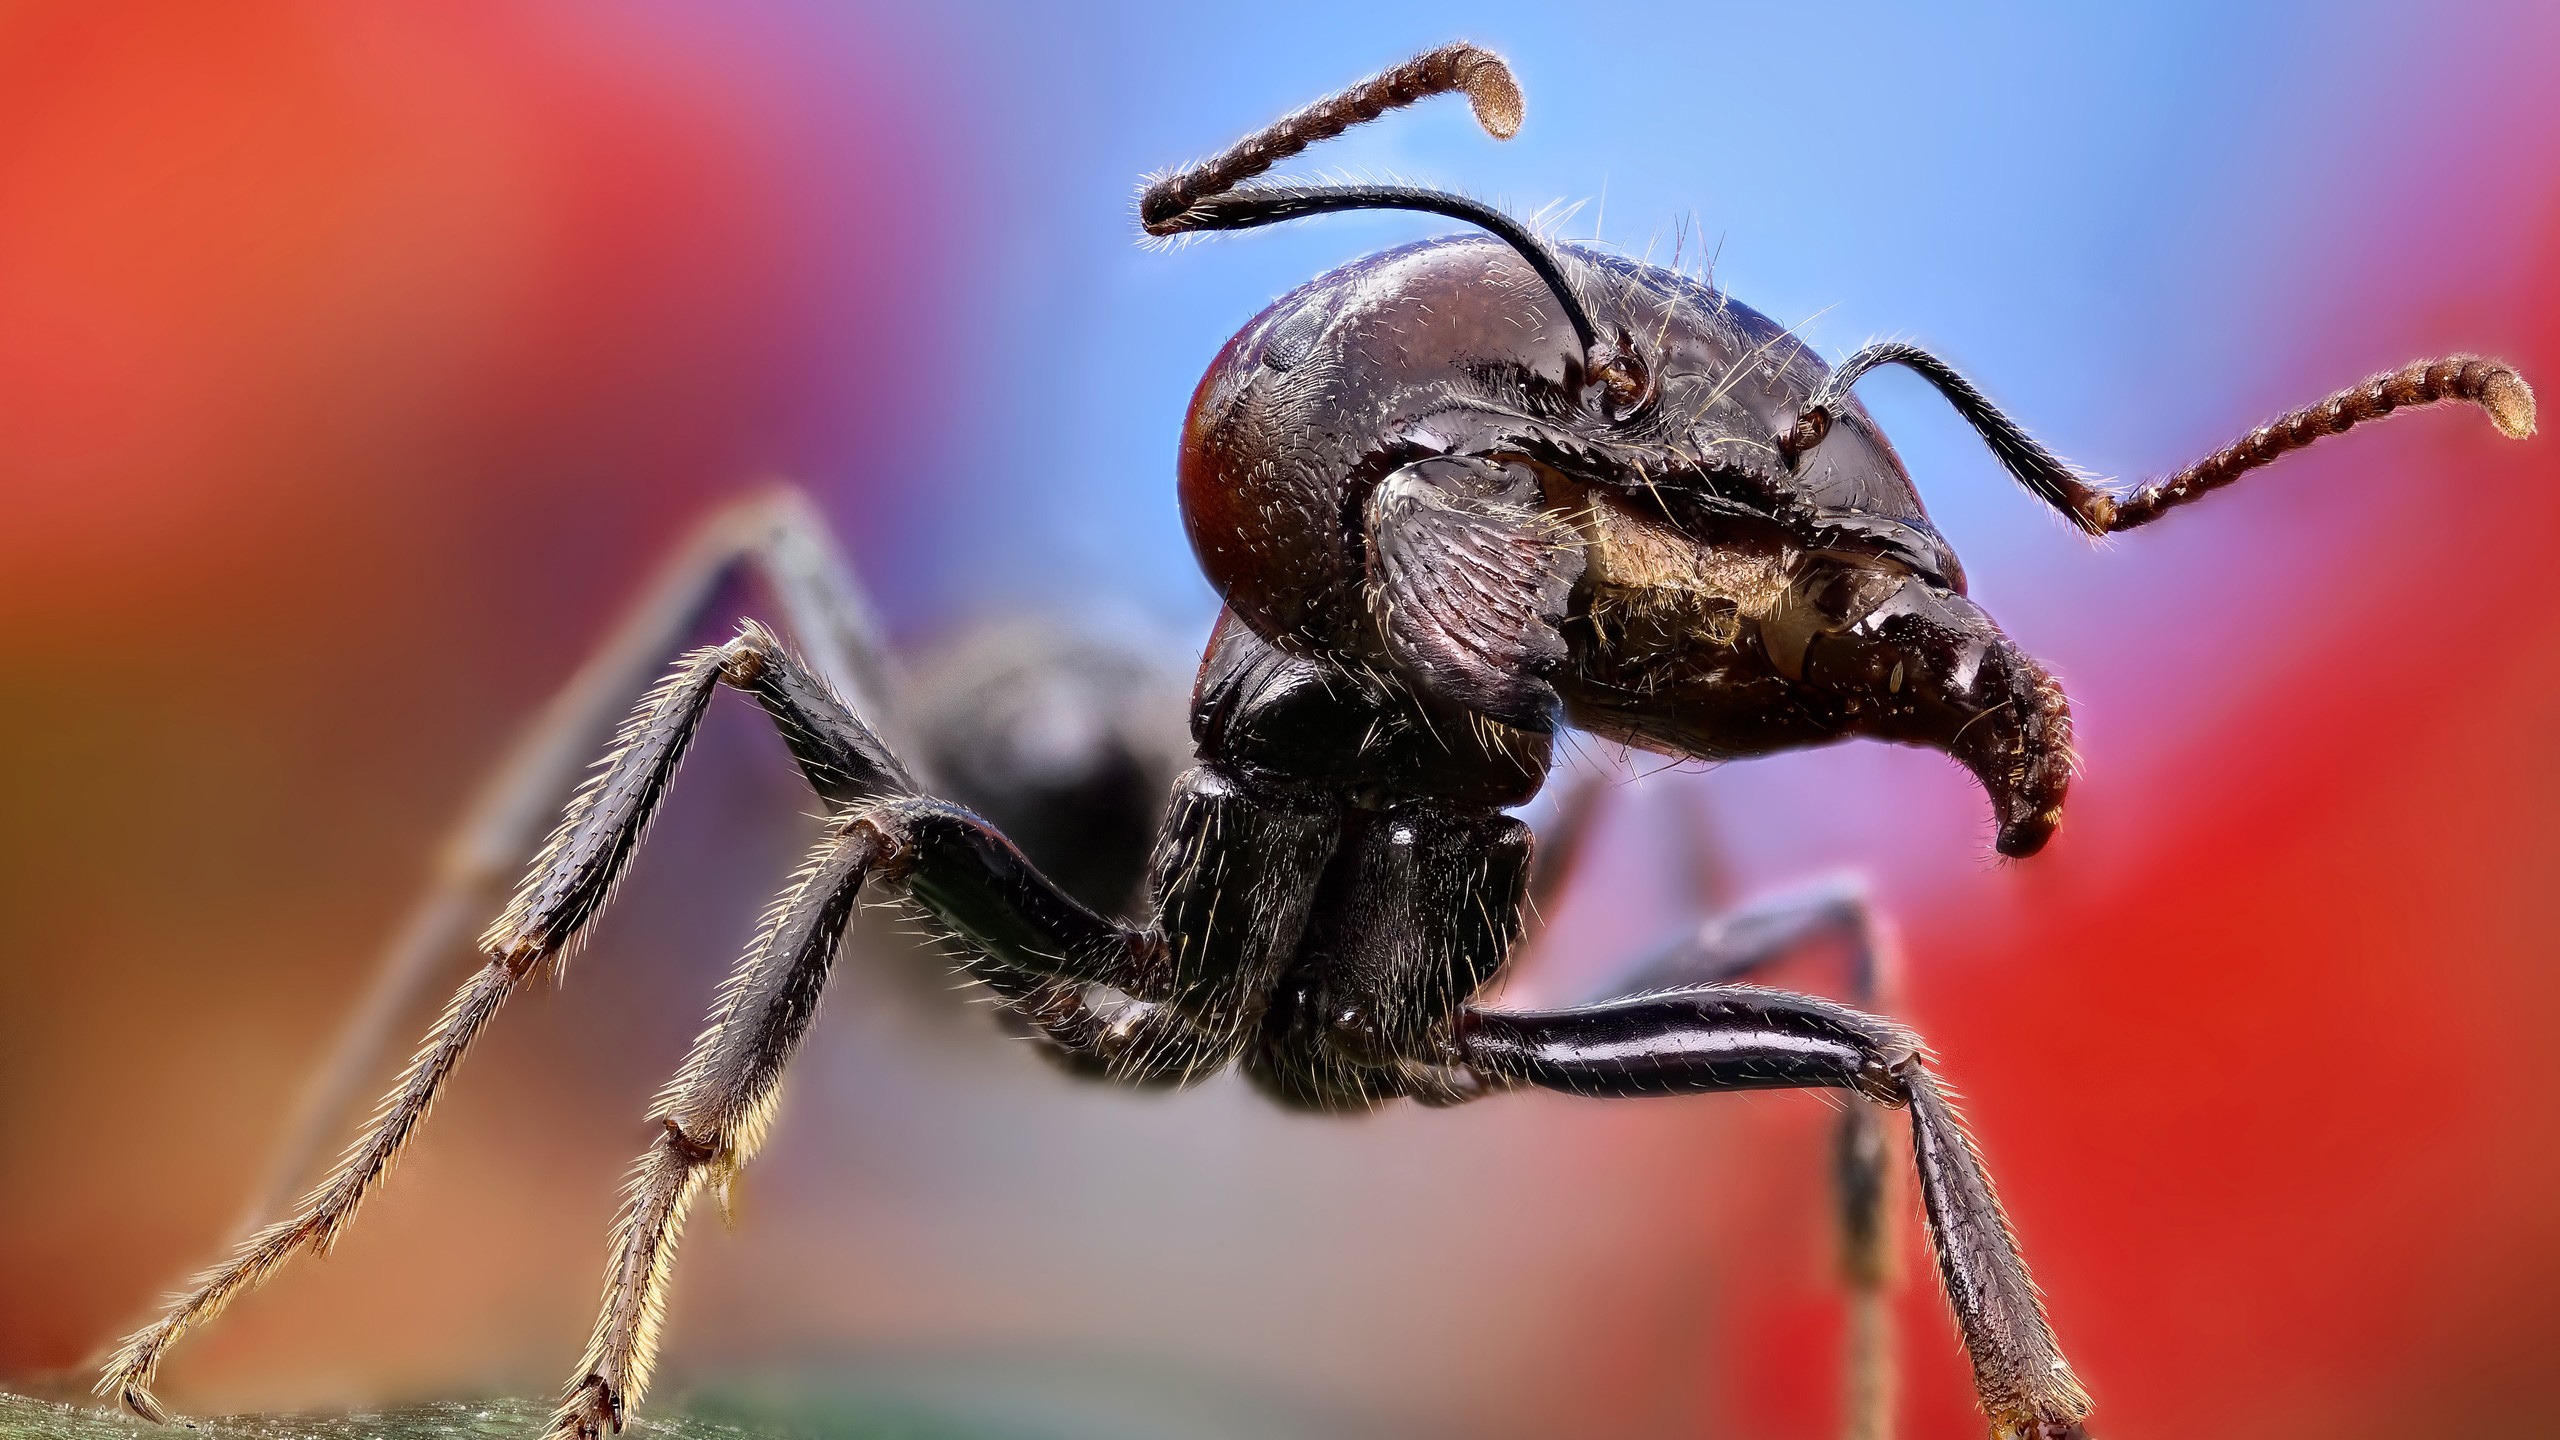 Ant Close Up for 2560x1440 HDTV resolution